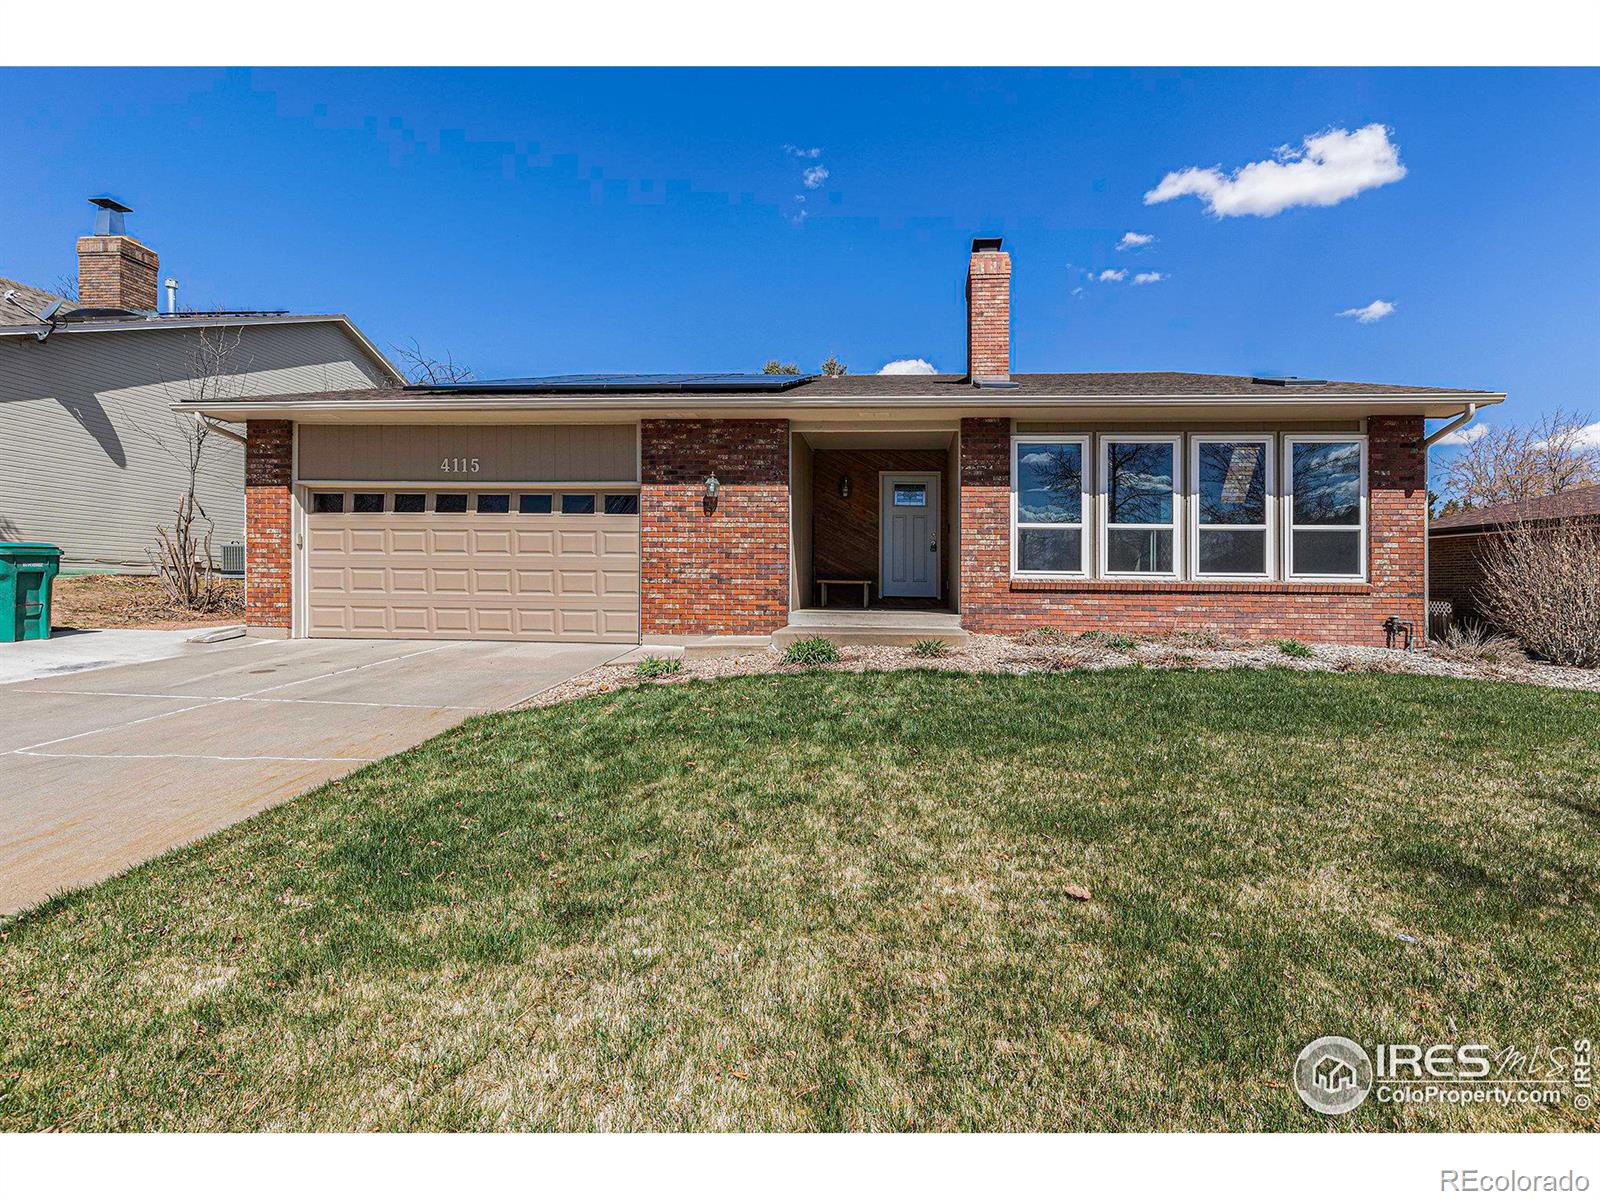 CMA Image for 3903 w 14th st rd,Greeley, Colorado